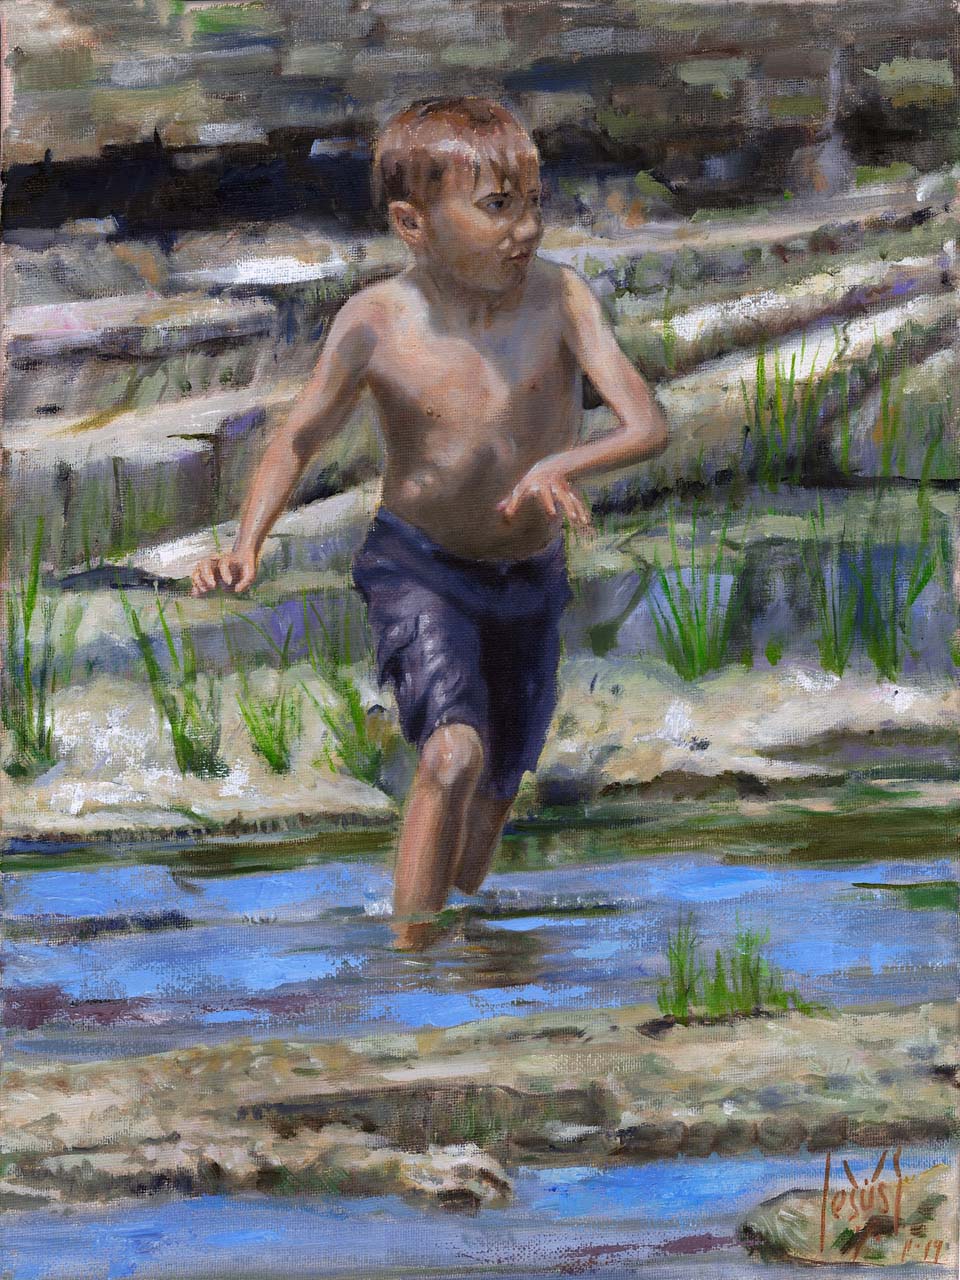 BOY AT THE MOIRA RIVER, BY VANDERWATER, original oil painting